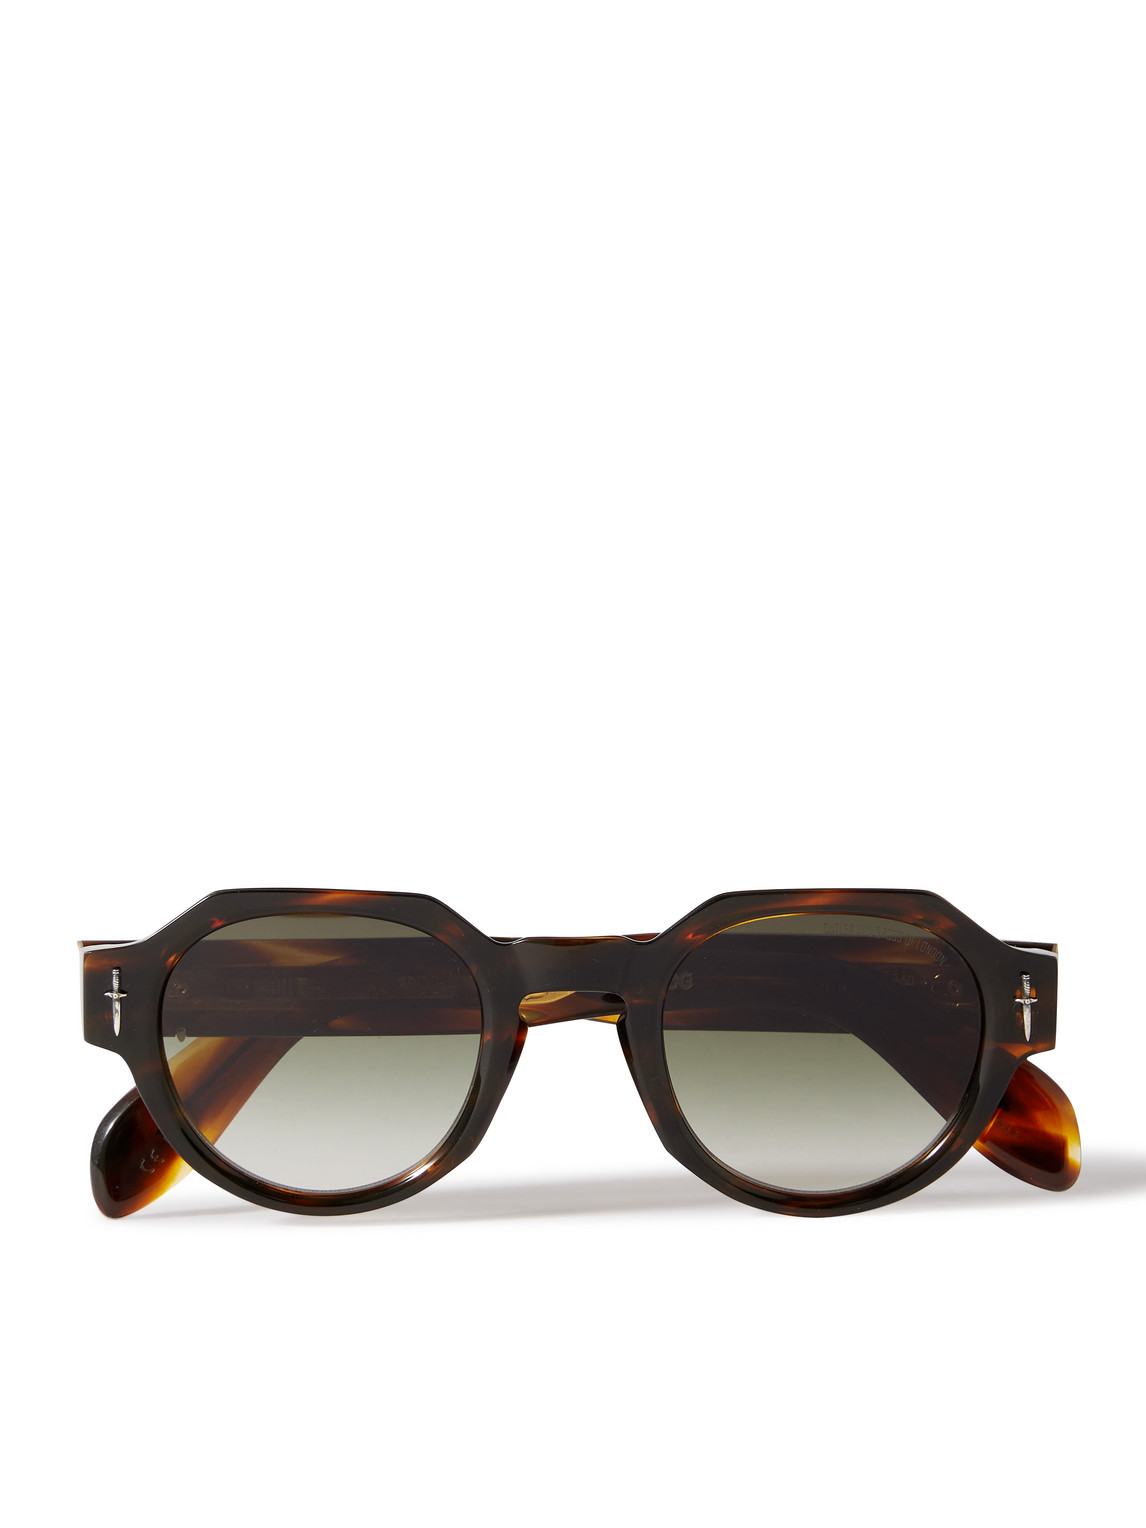 Cutler And Gross The Great Frog 006 Round-frame Acetate Sunglasses In Tortoiseshell